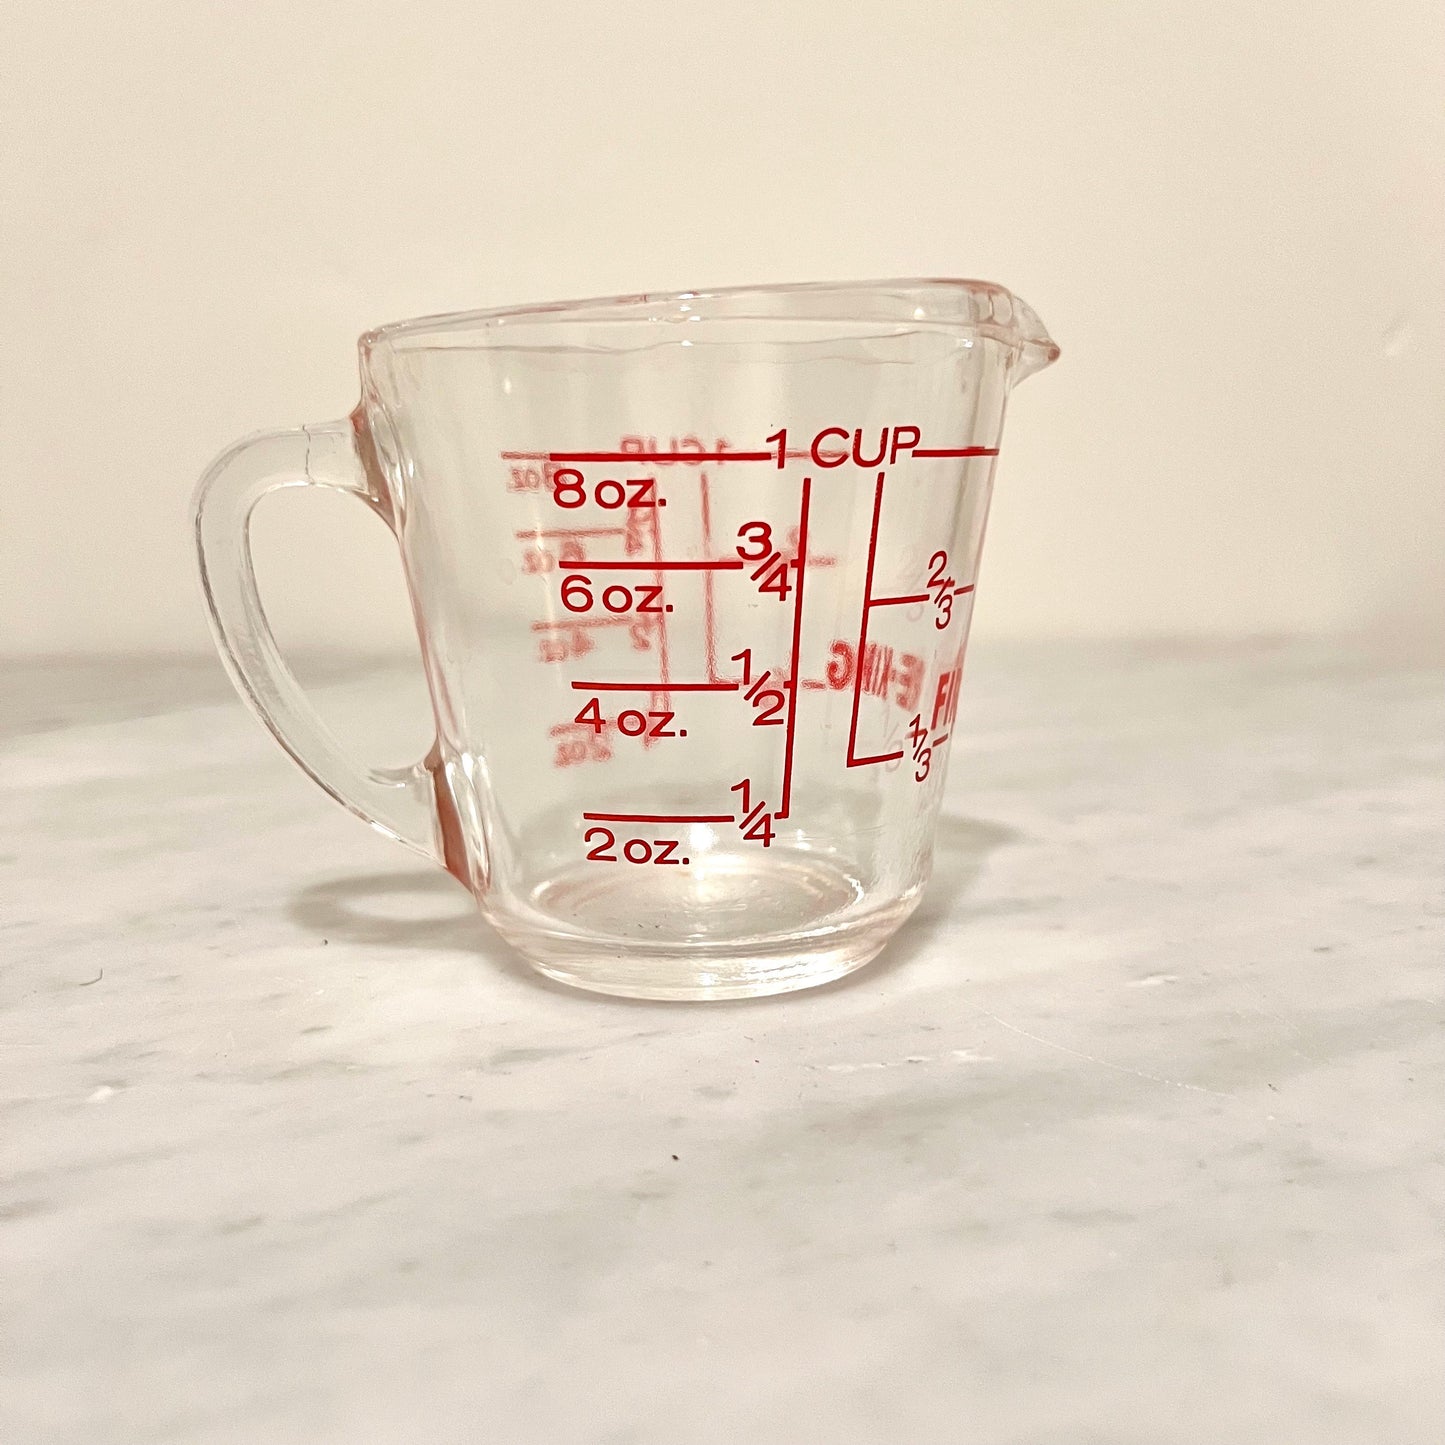 Fire King 1 Cup 8 oz Measuring Cup #469, Red Lettering 1950s, D Handle Imperial Measure For Cooking Use Vintage, Made in USA